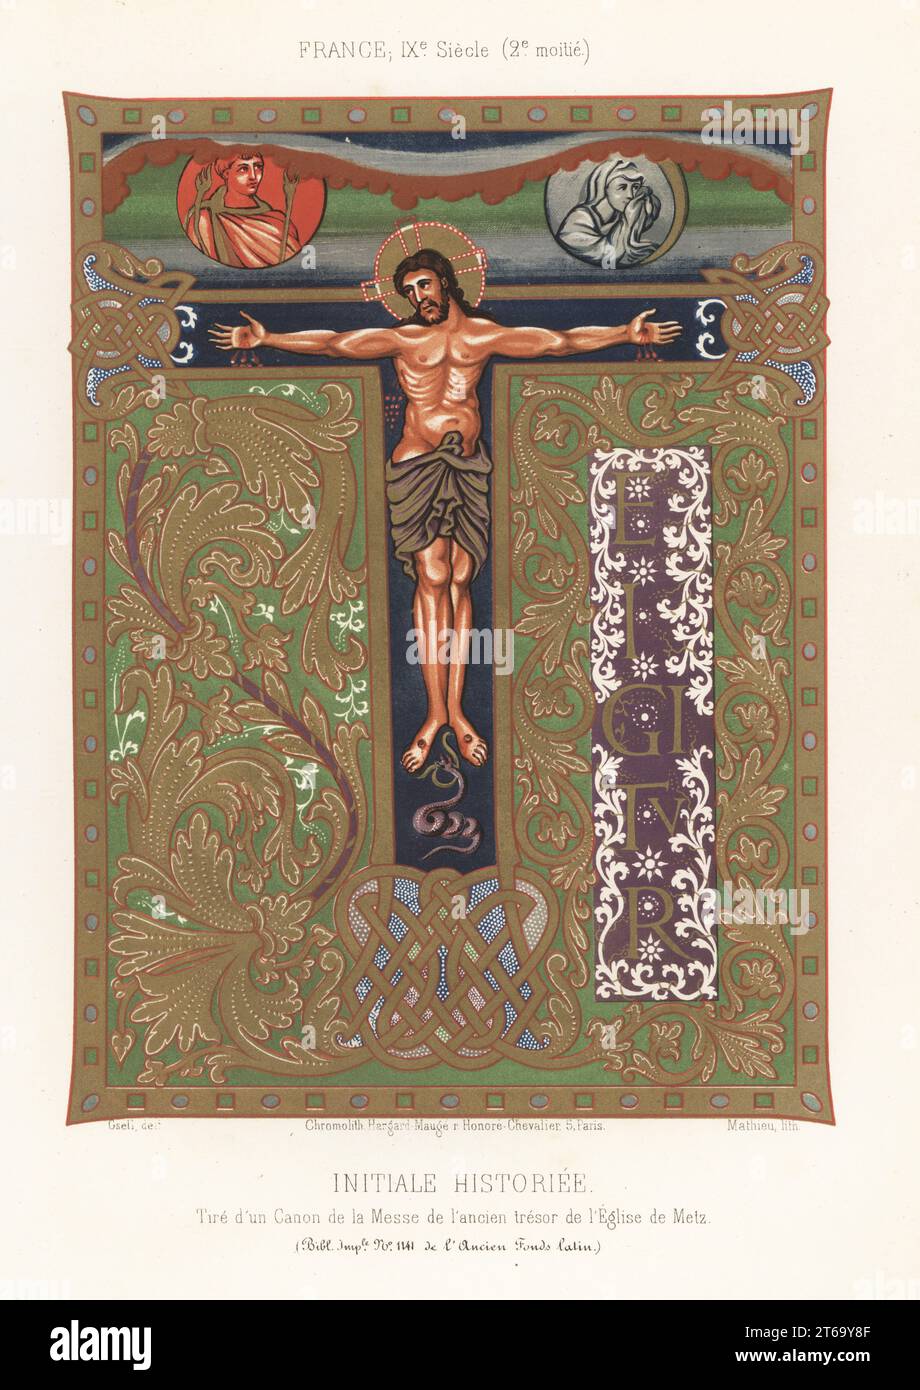 Illuminated letter T representing the Crucifixion of Jesus Christ, 9th century, France. Medallions of the Sun and the Moon above. Gold letters on purple framed with white arabesques. Initiale Historiee. Taken from the Sacramentaire de Charles le Chauve, Latin MS 1141, F6v. Chromolithograph by Mathieu after an illustration by Gsell from Charles Louandres Les Arts Somptuaires, The Sumptuary Arts, Hangard-Mauge, Paris, 1858. Stock Photo